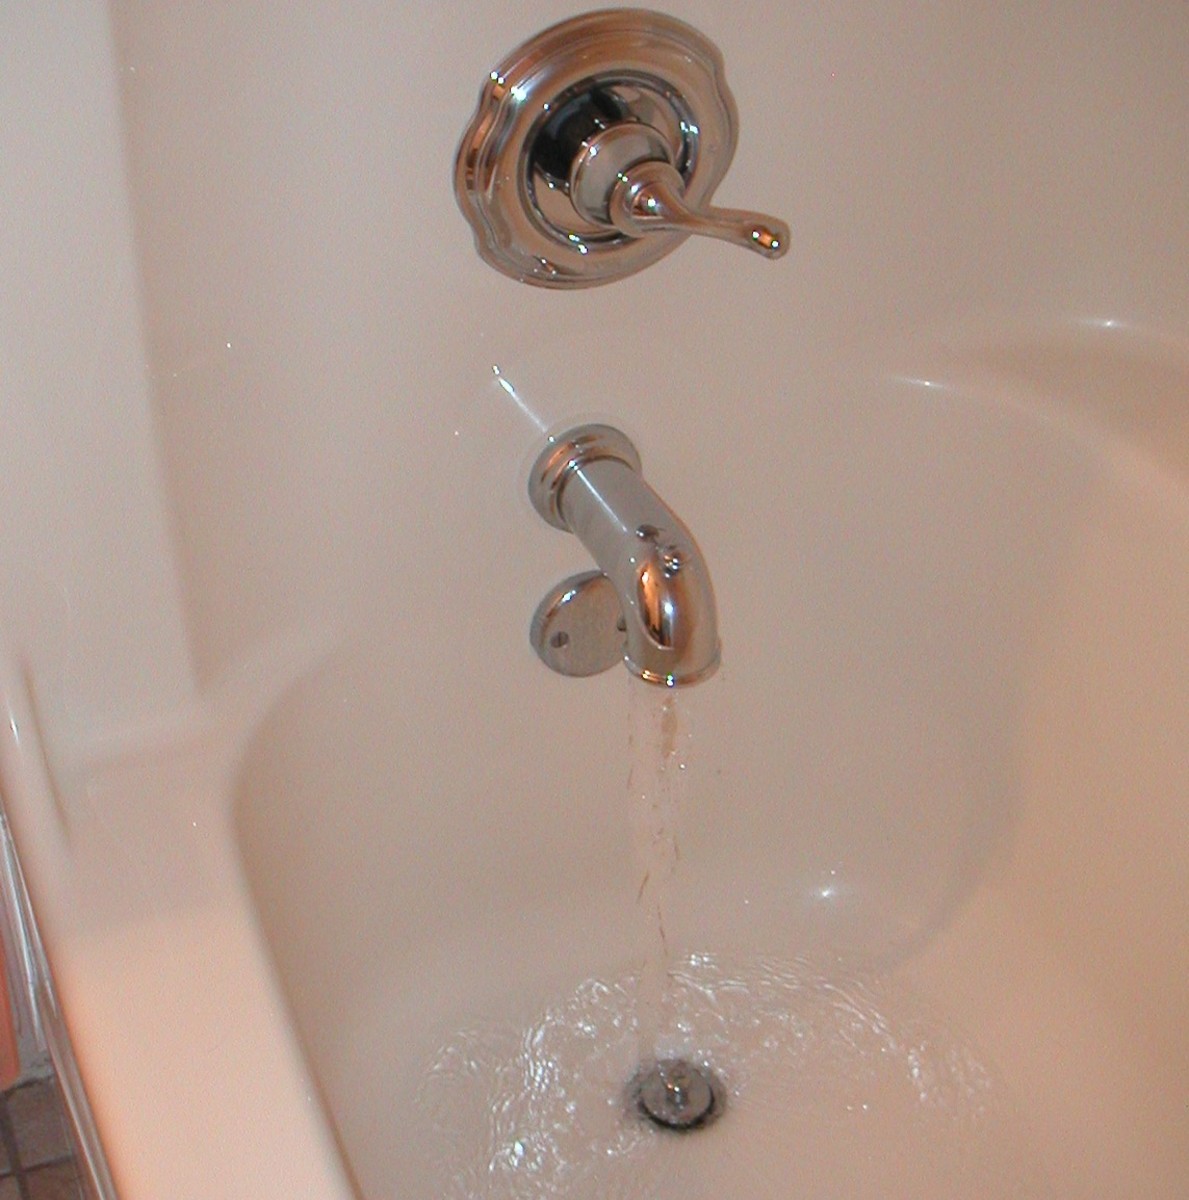 The Bathtub Philosophy: Water from the faucet is income. Drains and leaks must be plugged.